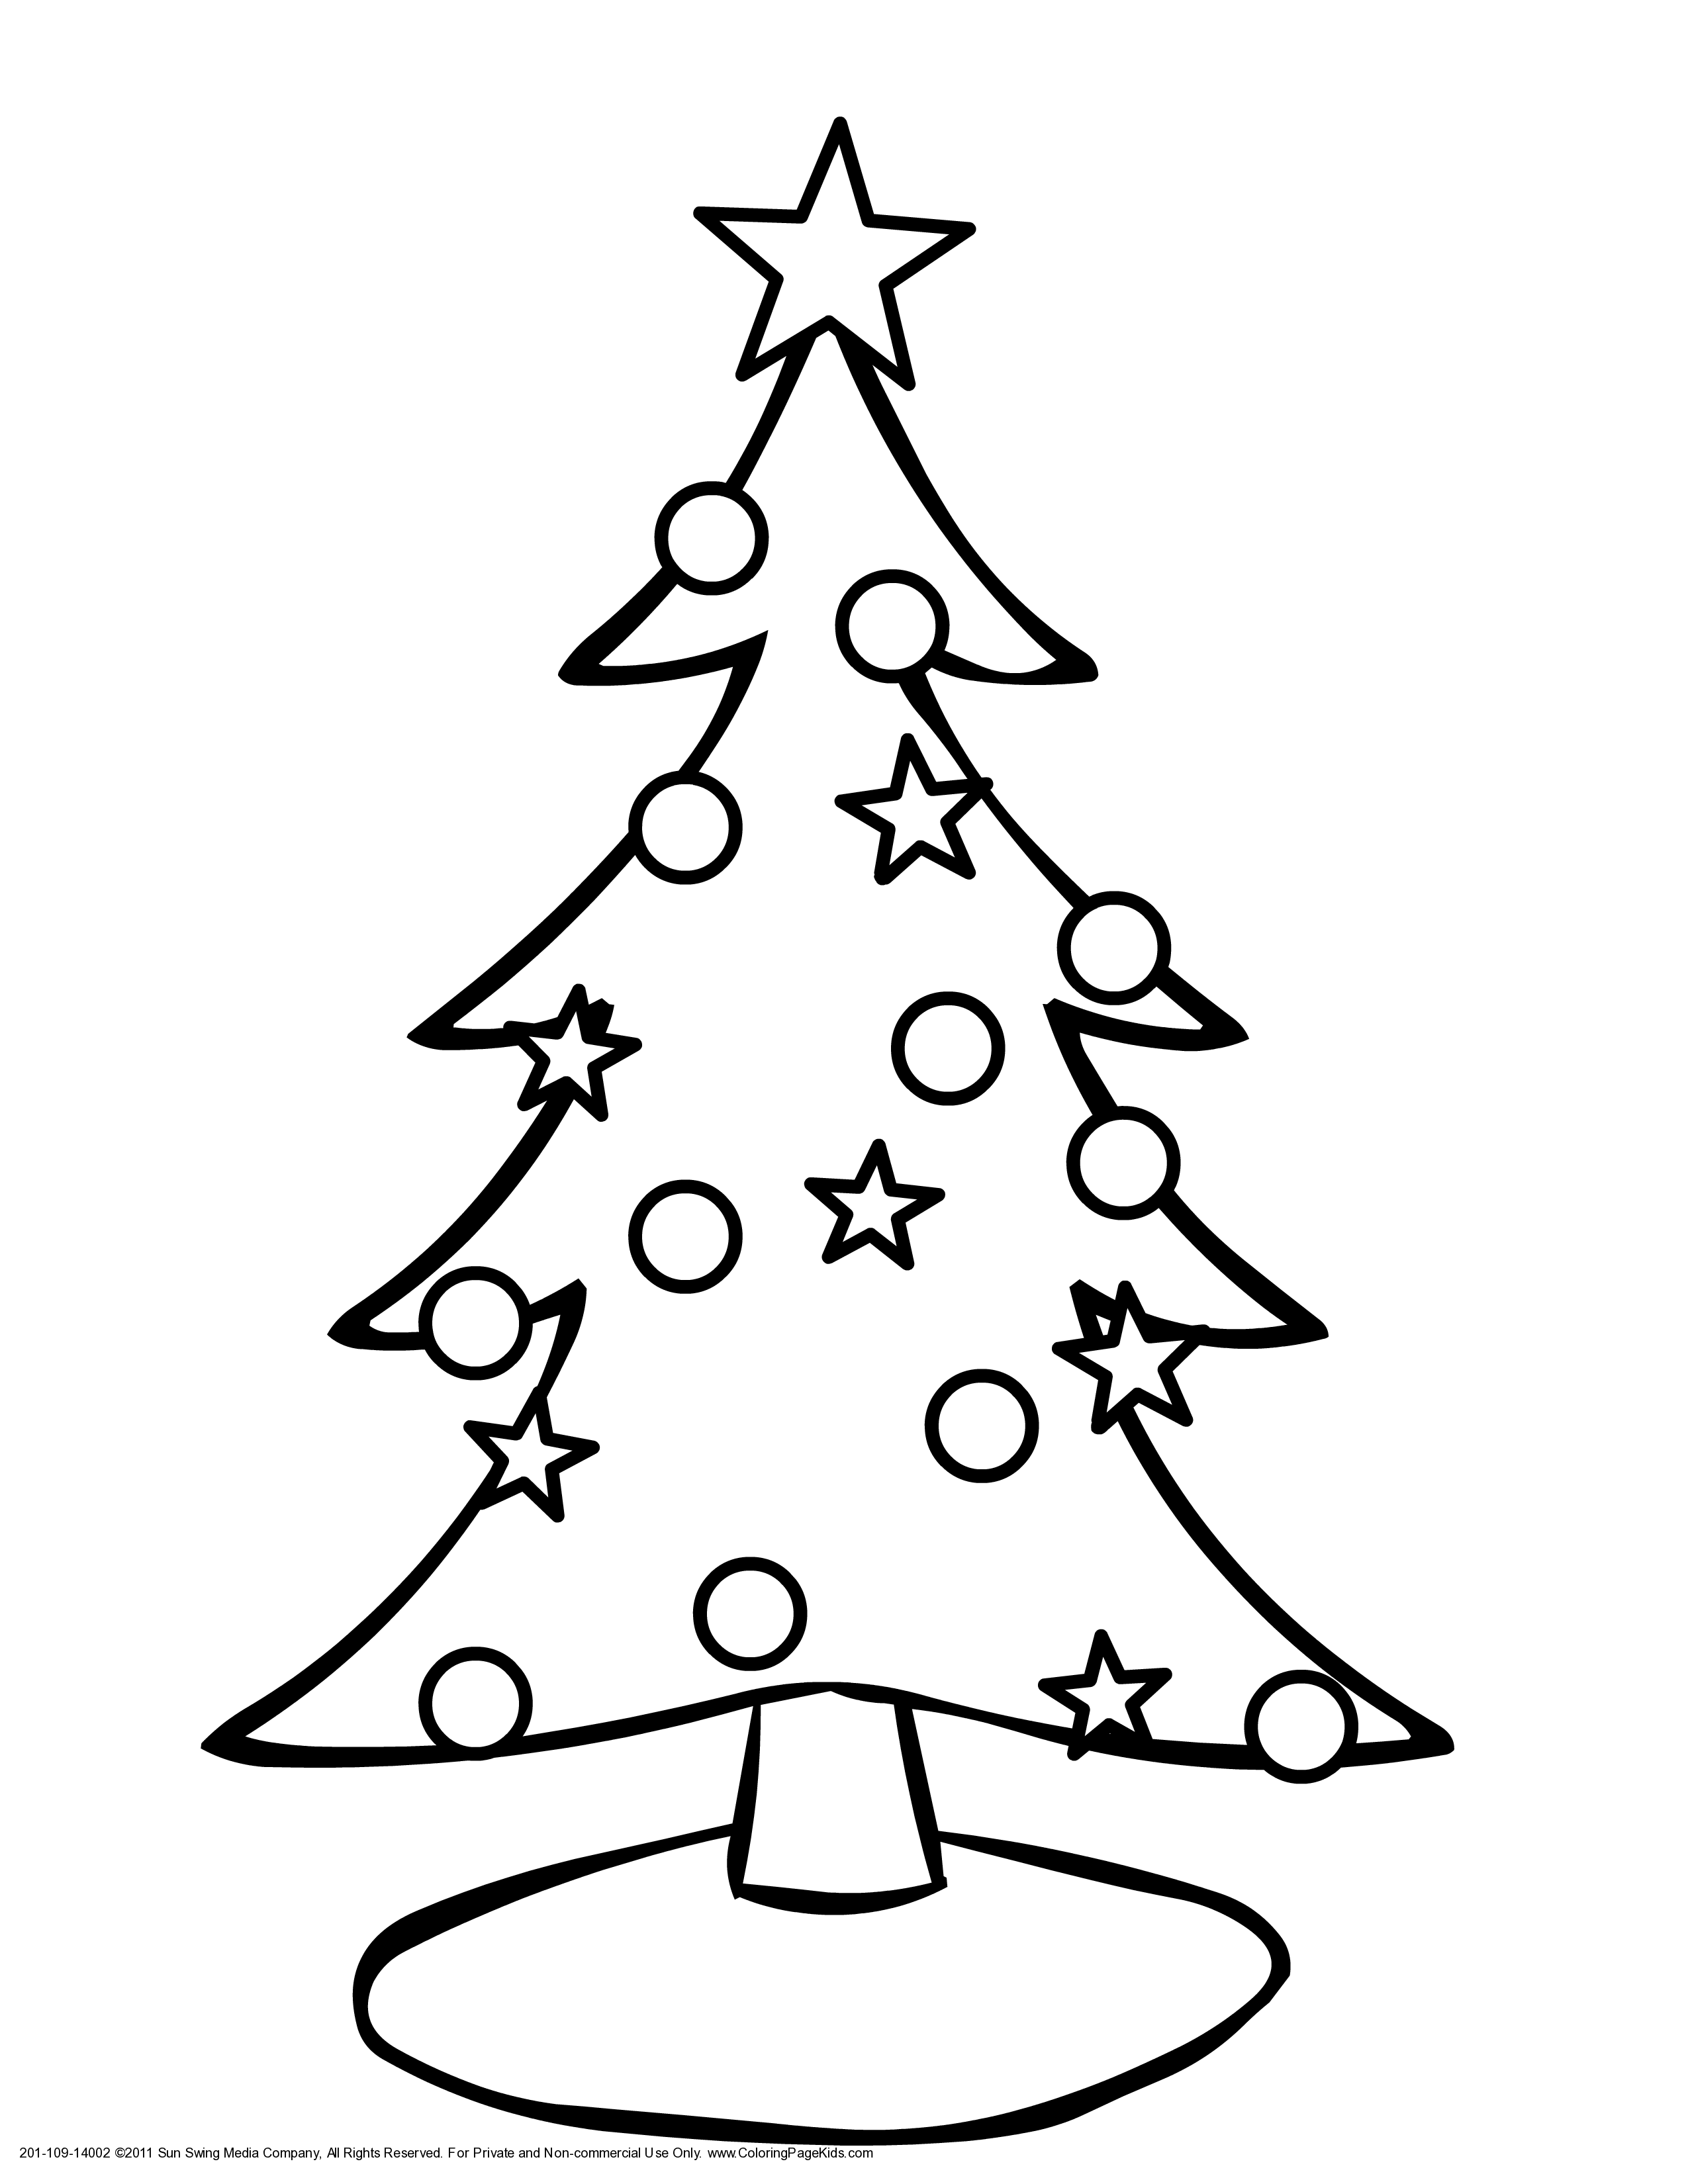 Christmas Tree Coloring Page Printables   Coloring Pages For All ...